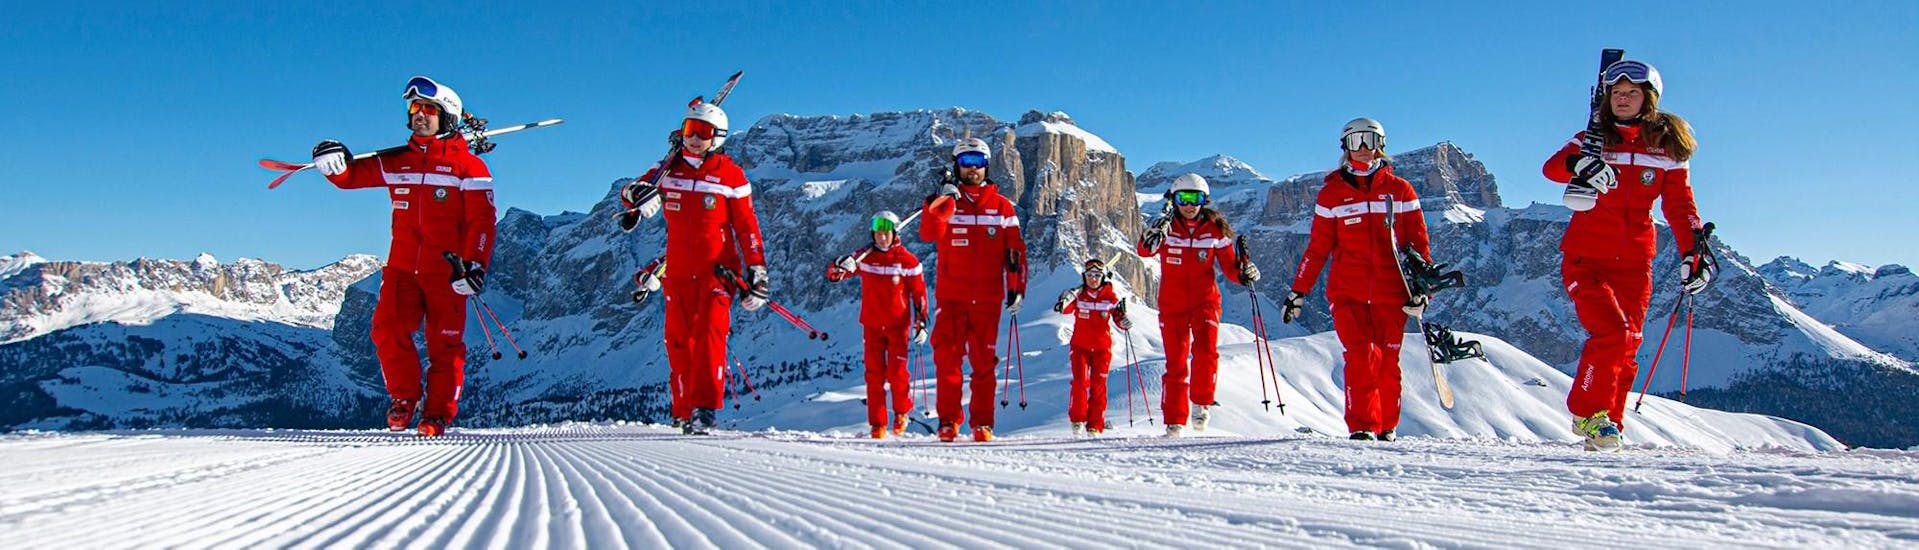 Ski instructors ready for another day of fun on the slopes of Val Gardena.